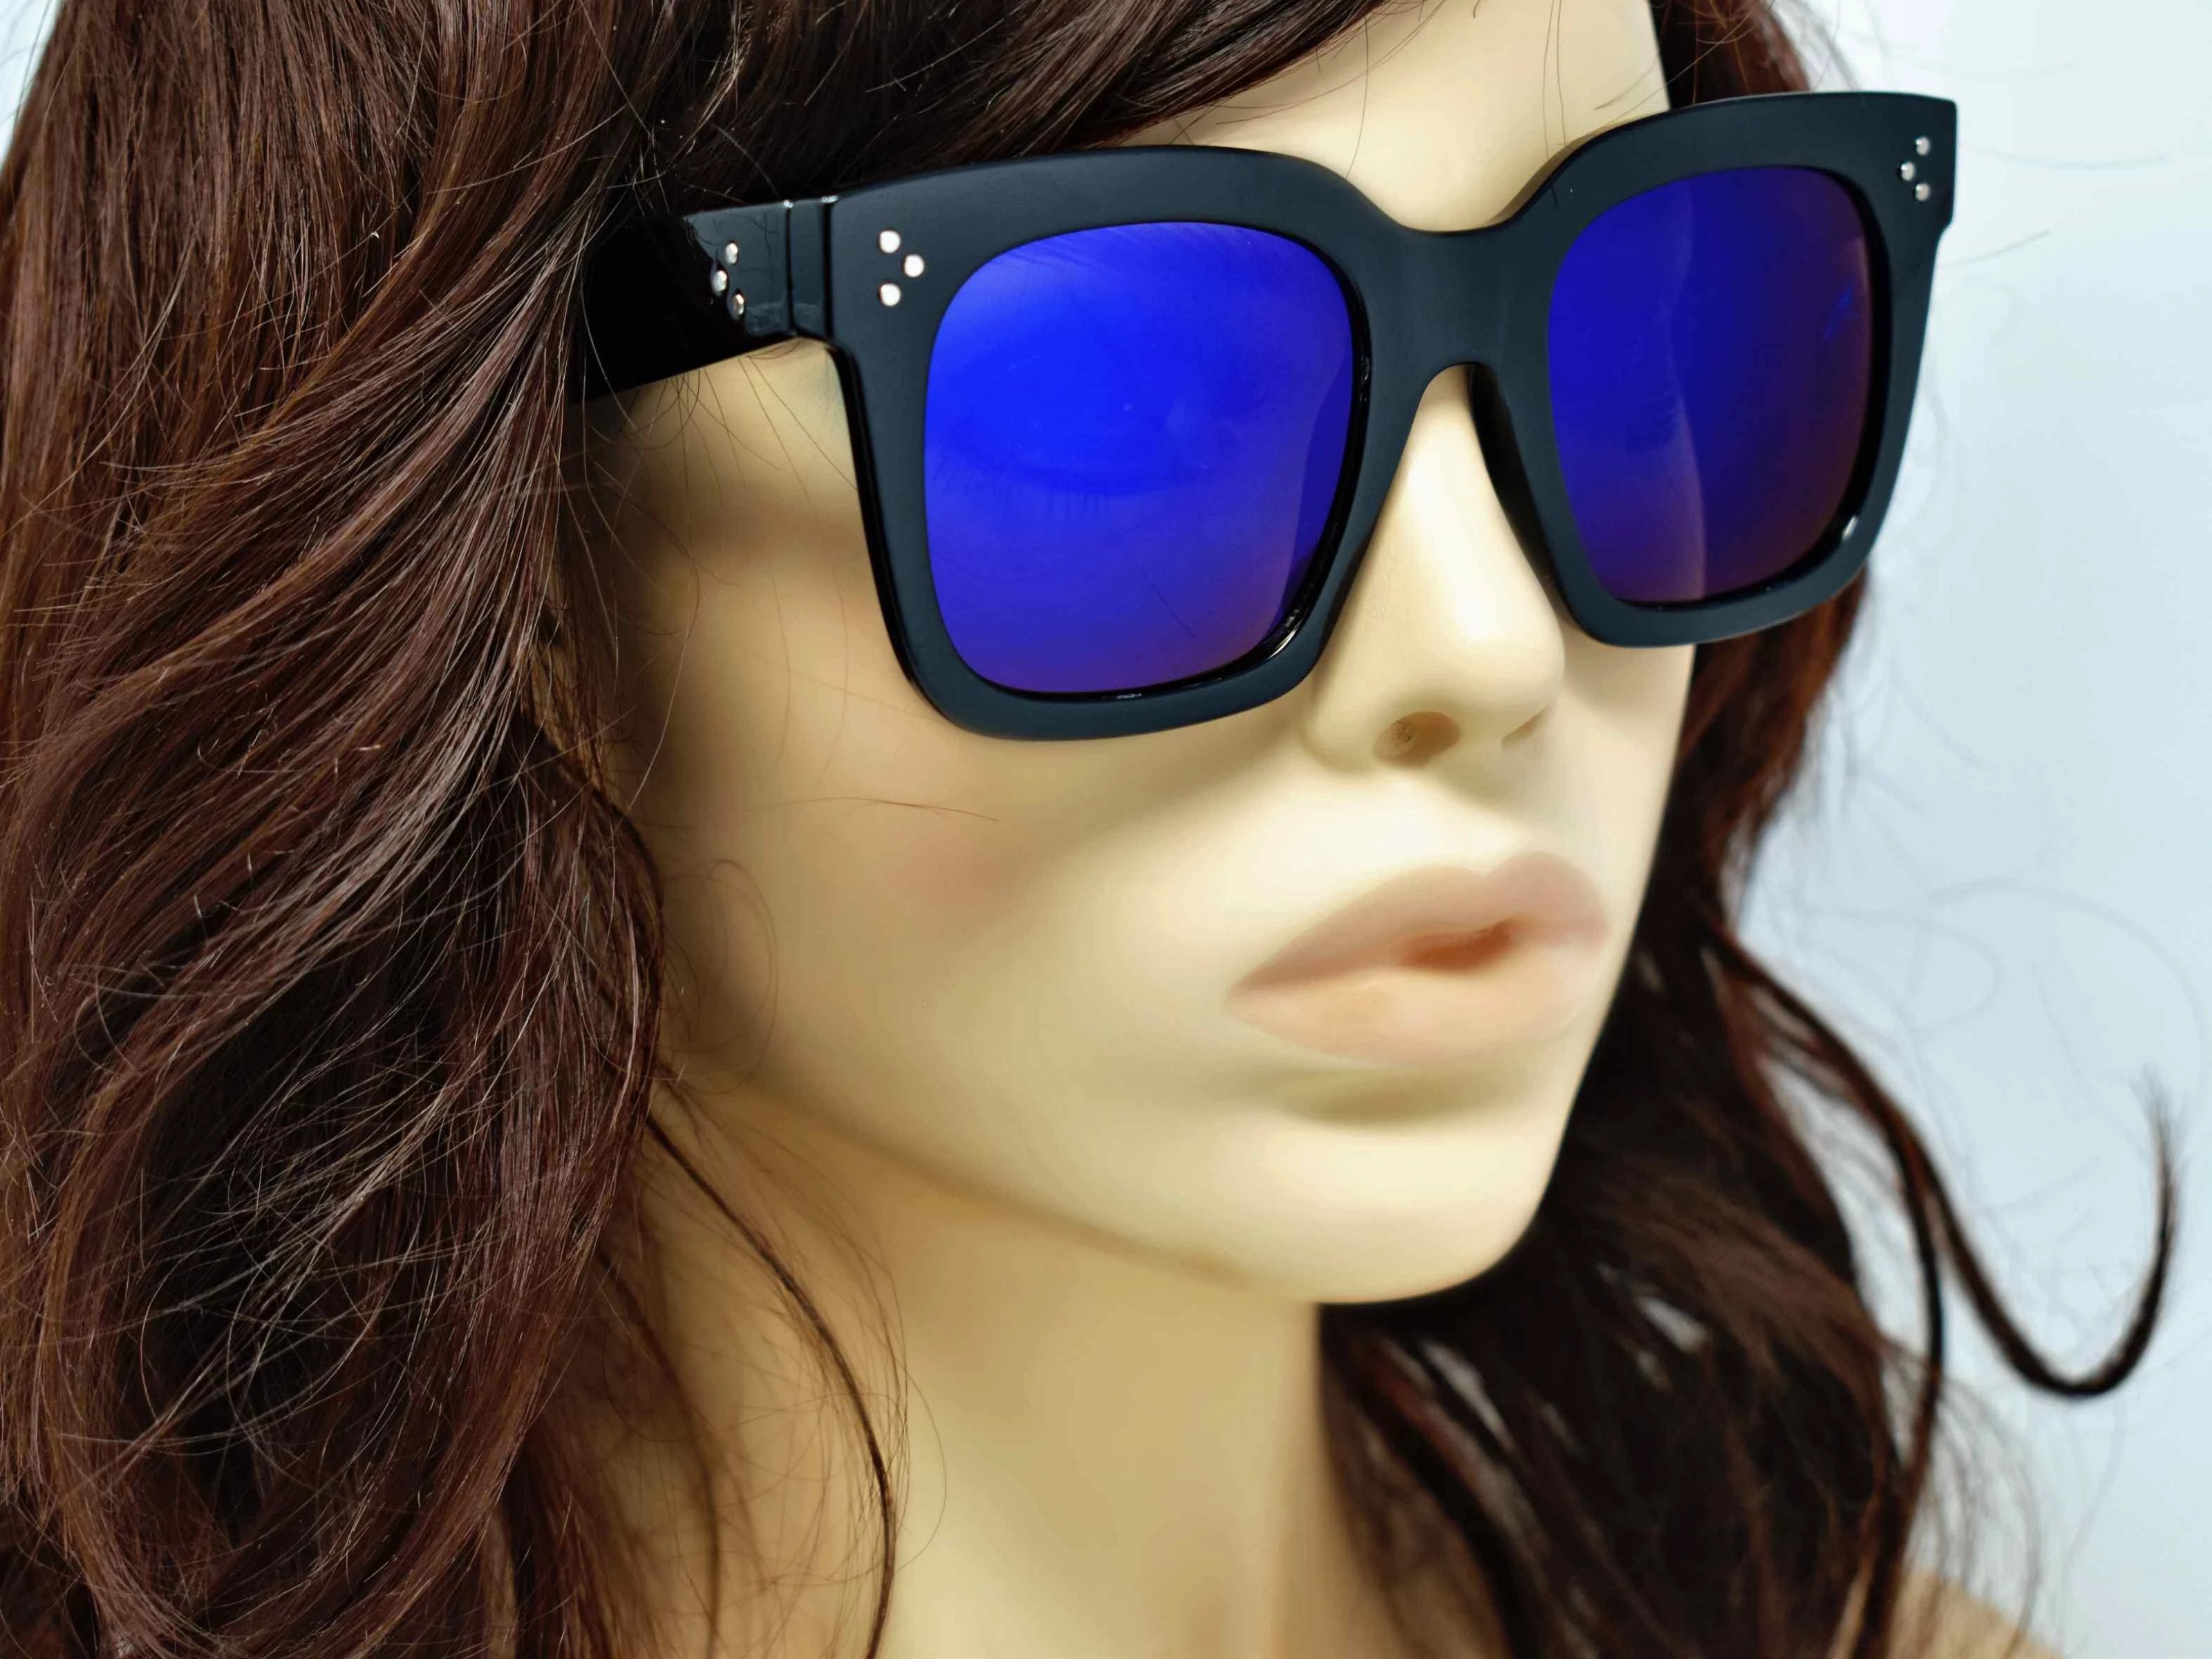 Cool and Classic you can always depend on our Amaranth Black framed sunglasses with a two toned blue mirrored lens in a wayfarer shape.